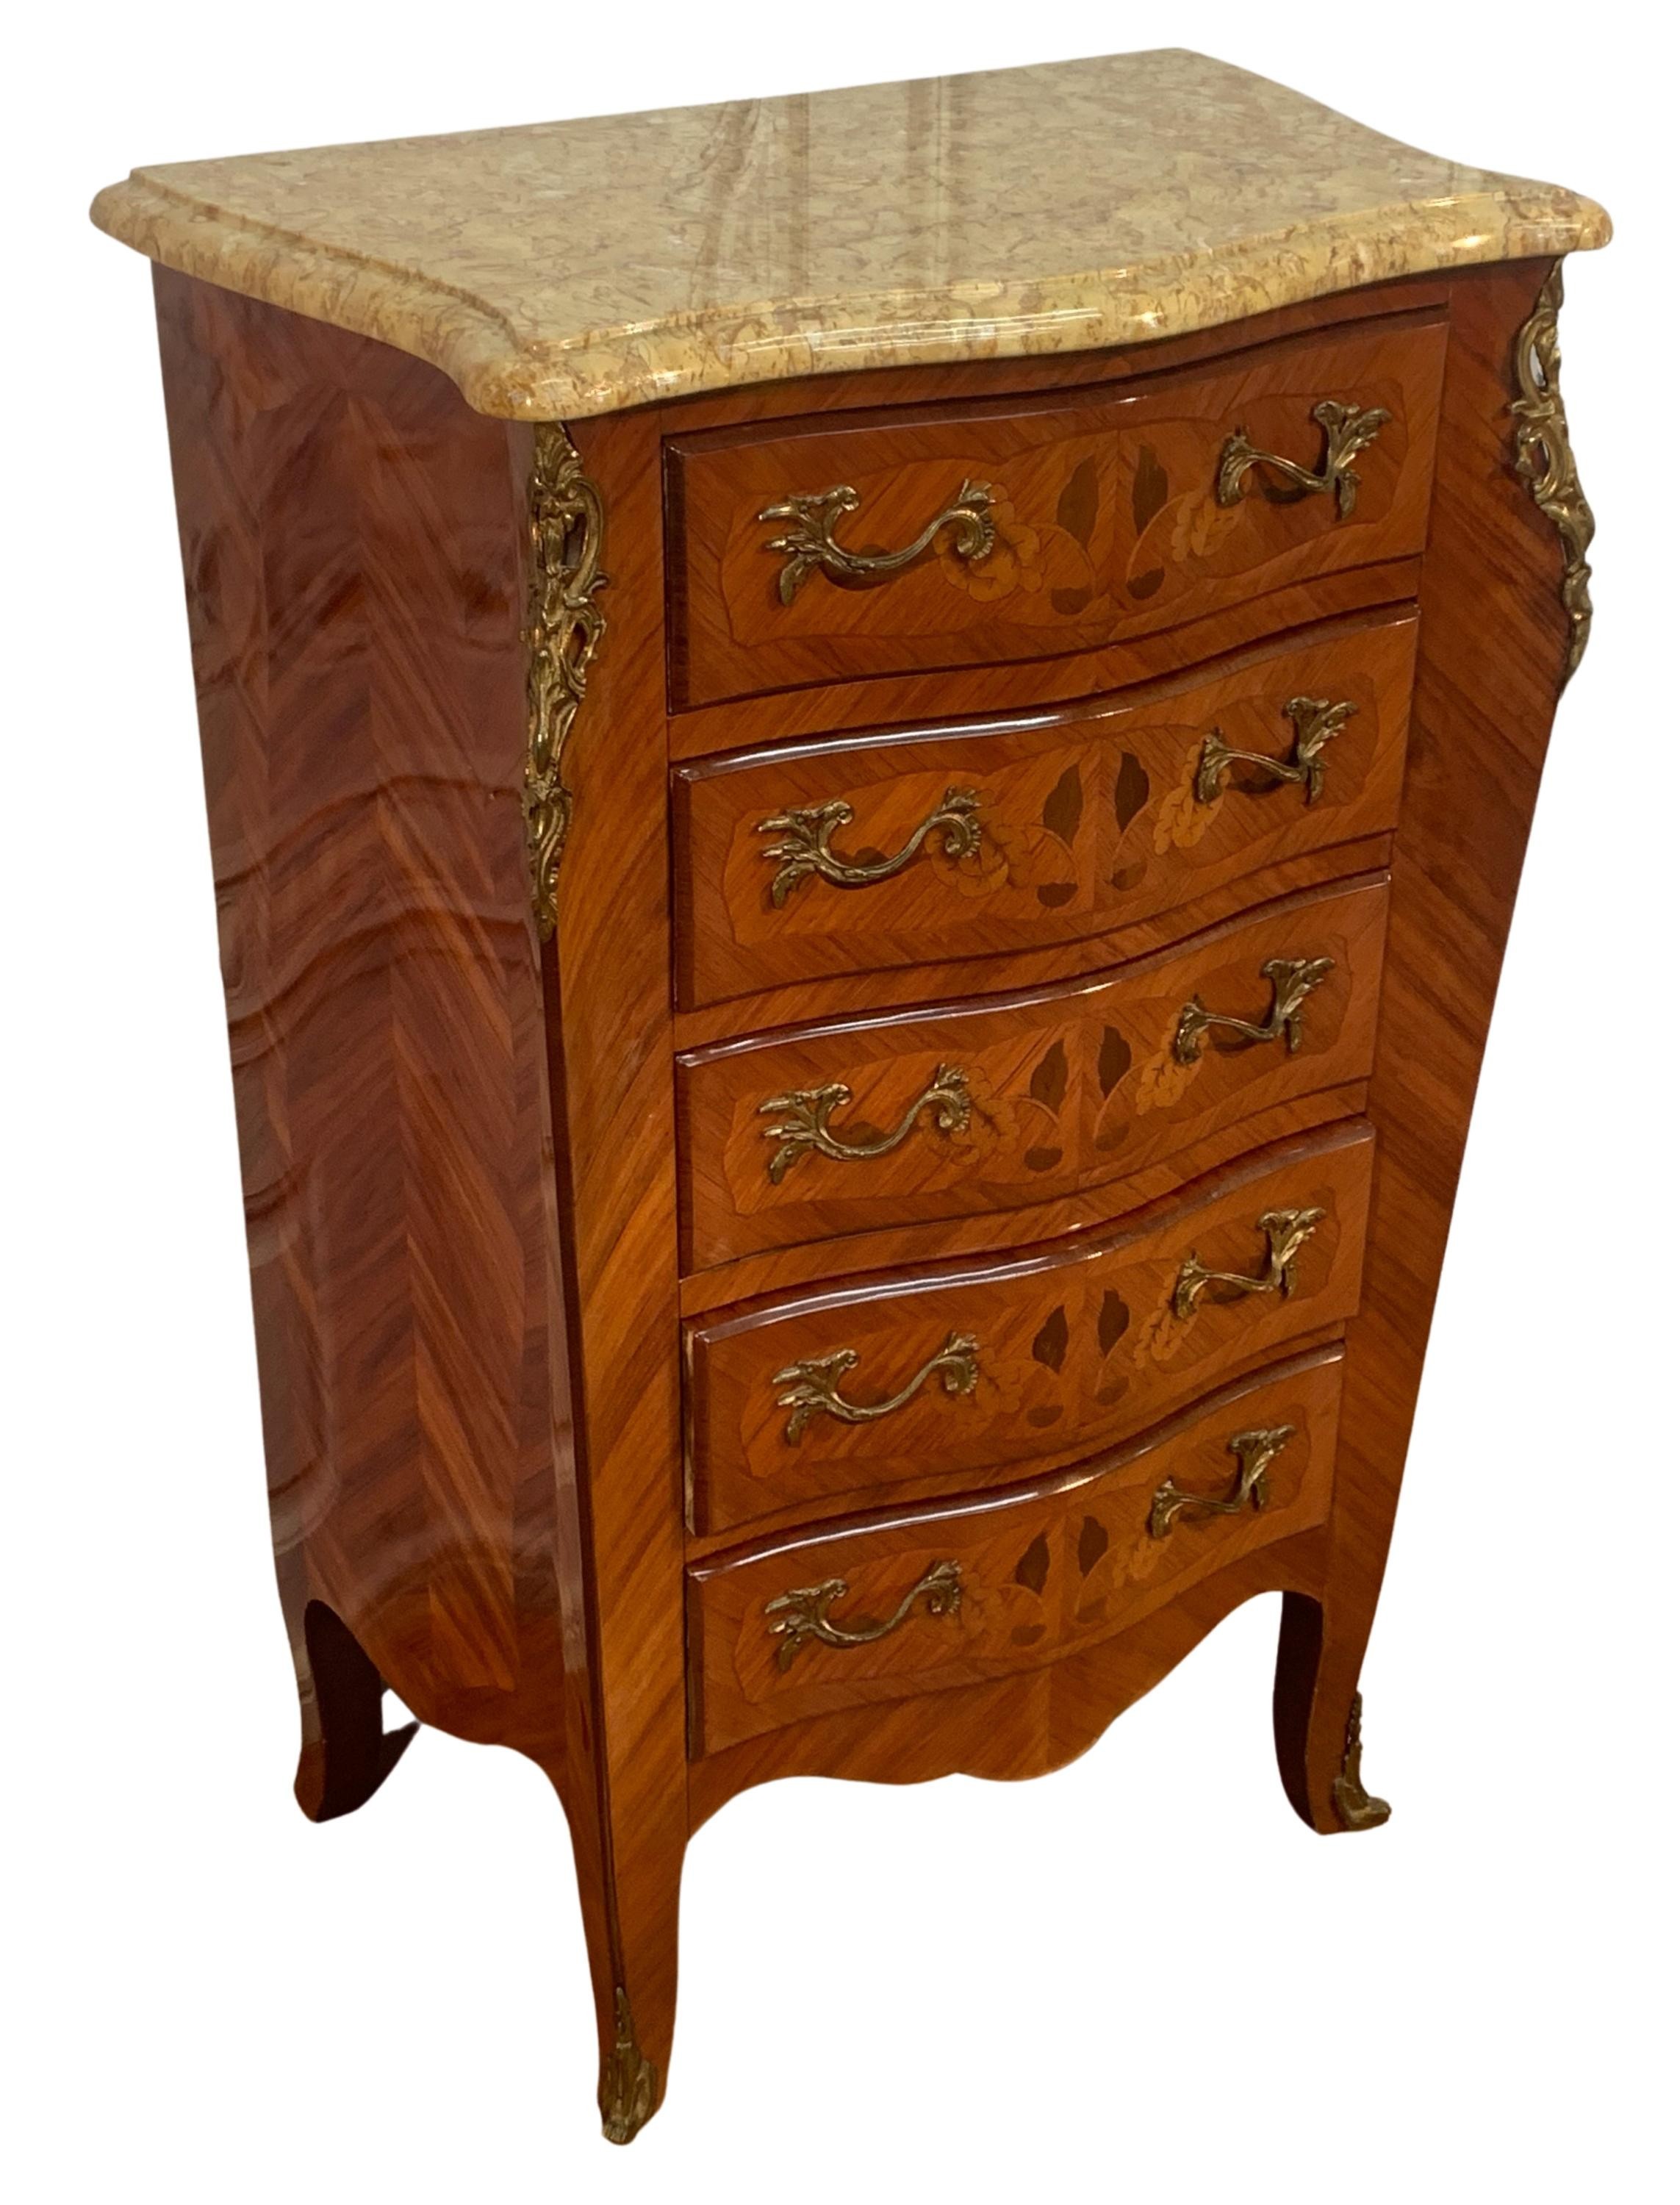 LOUIS XV STYLE INLAID M TOP COMMODE 2f8aff